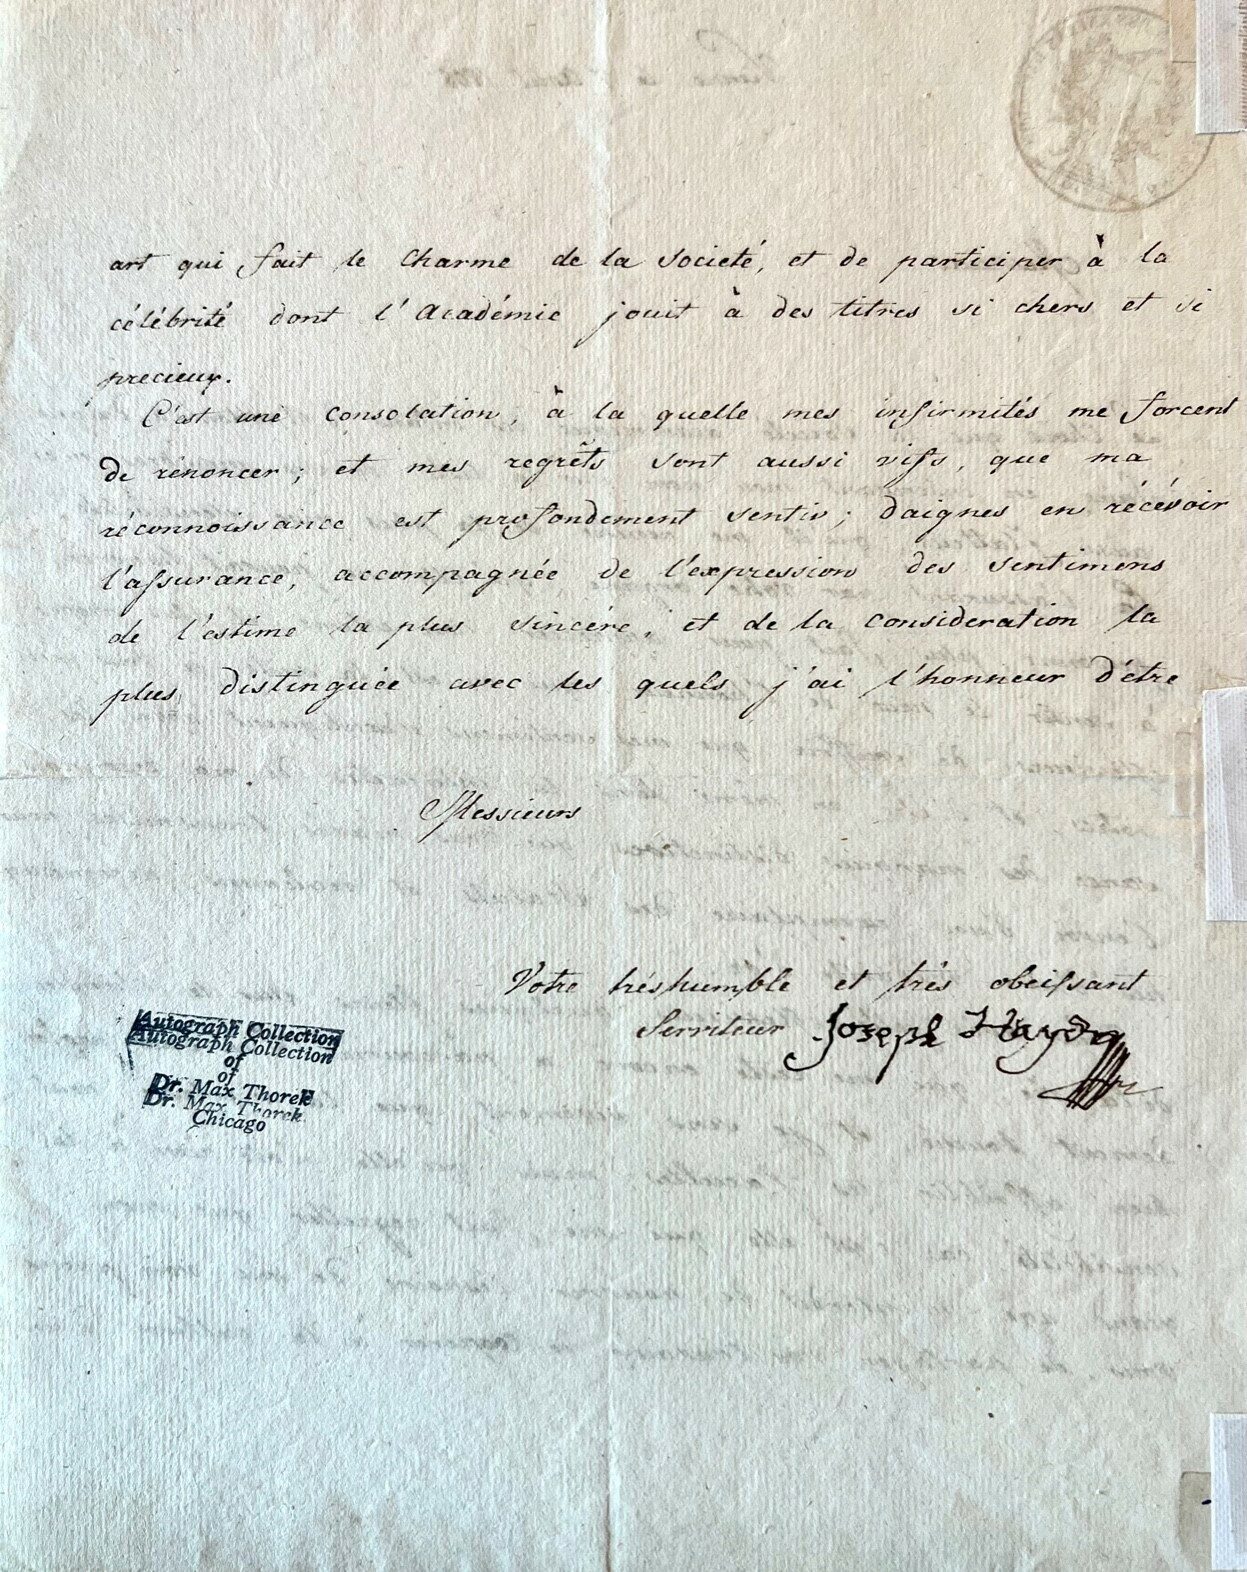 Rare and Effusive Signed Letter Declining Membership in the Société Académique des Enfants d’Apollon, Discussing His Advanced Age and the “flowers on the road of life…left to me to travel”